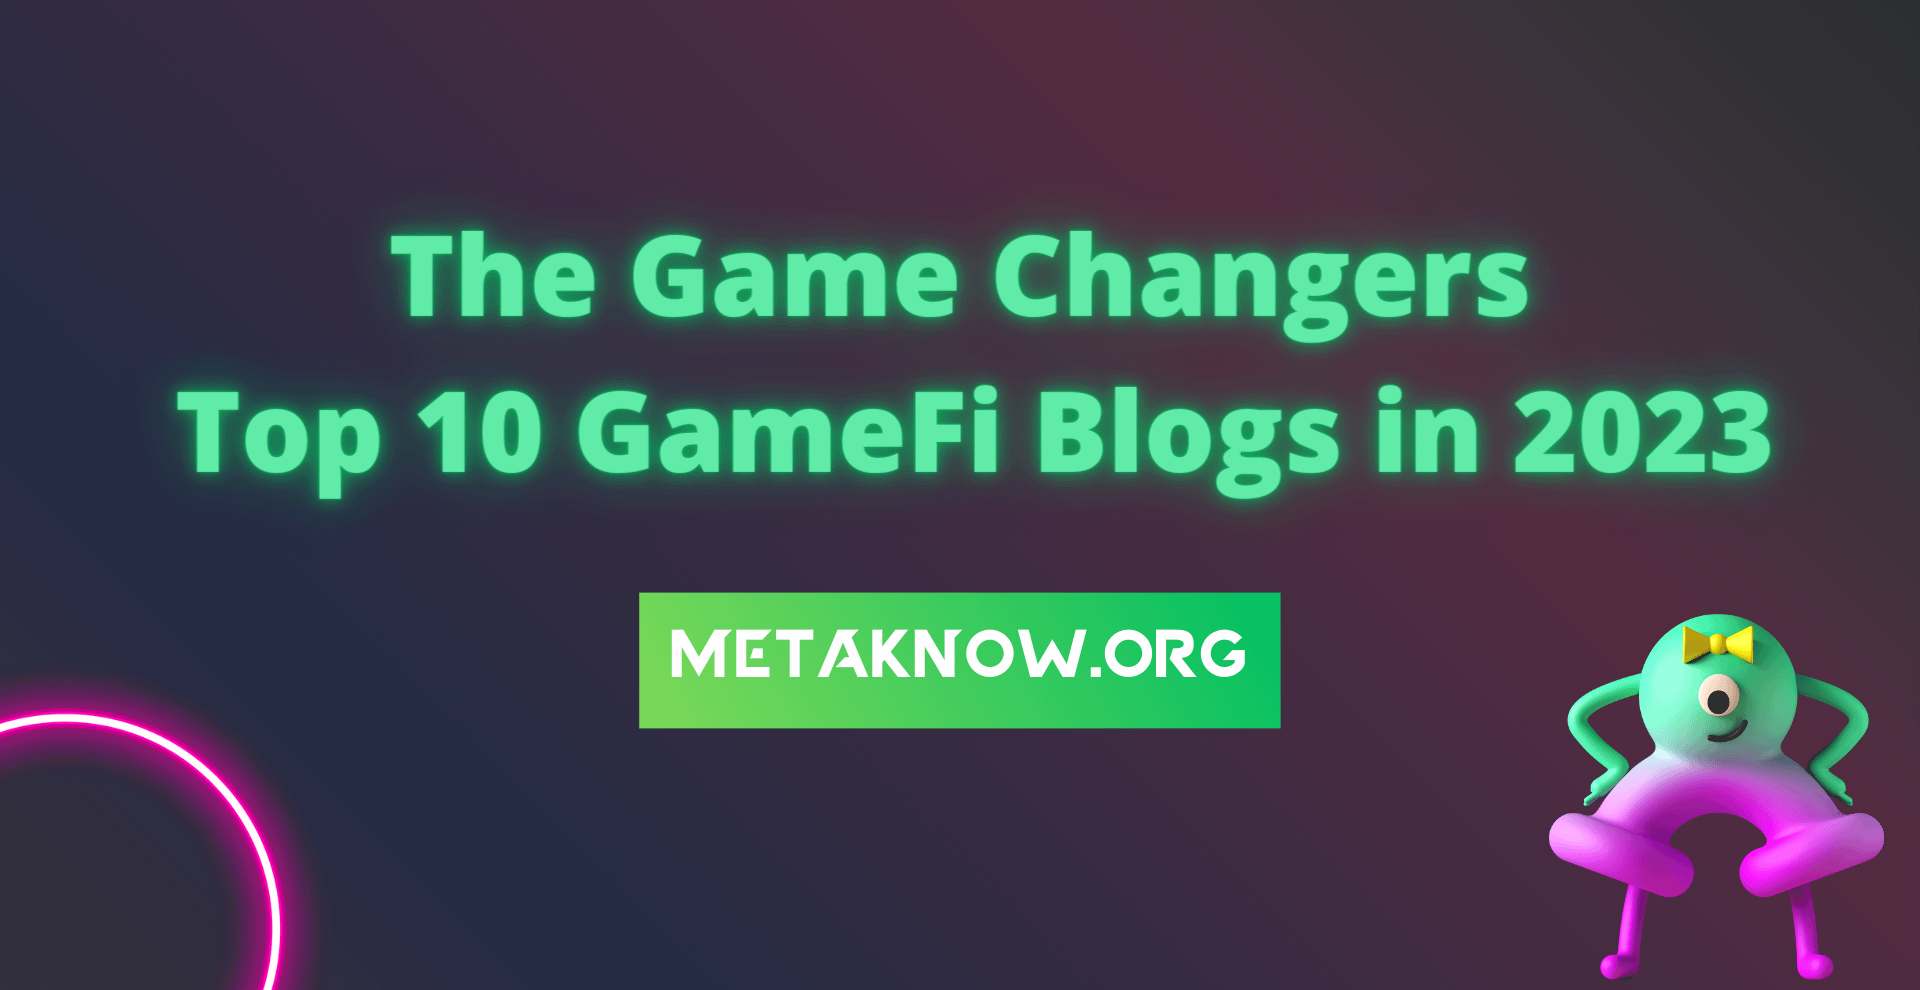 The Game-Changers: Top 10 GameFi Blogs in 2023